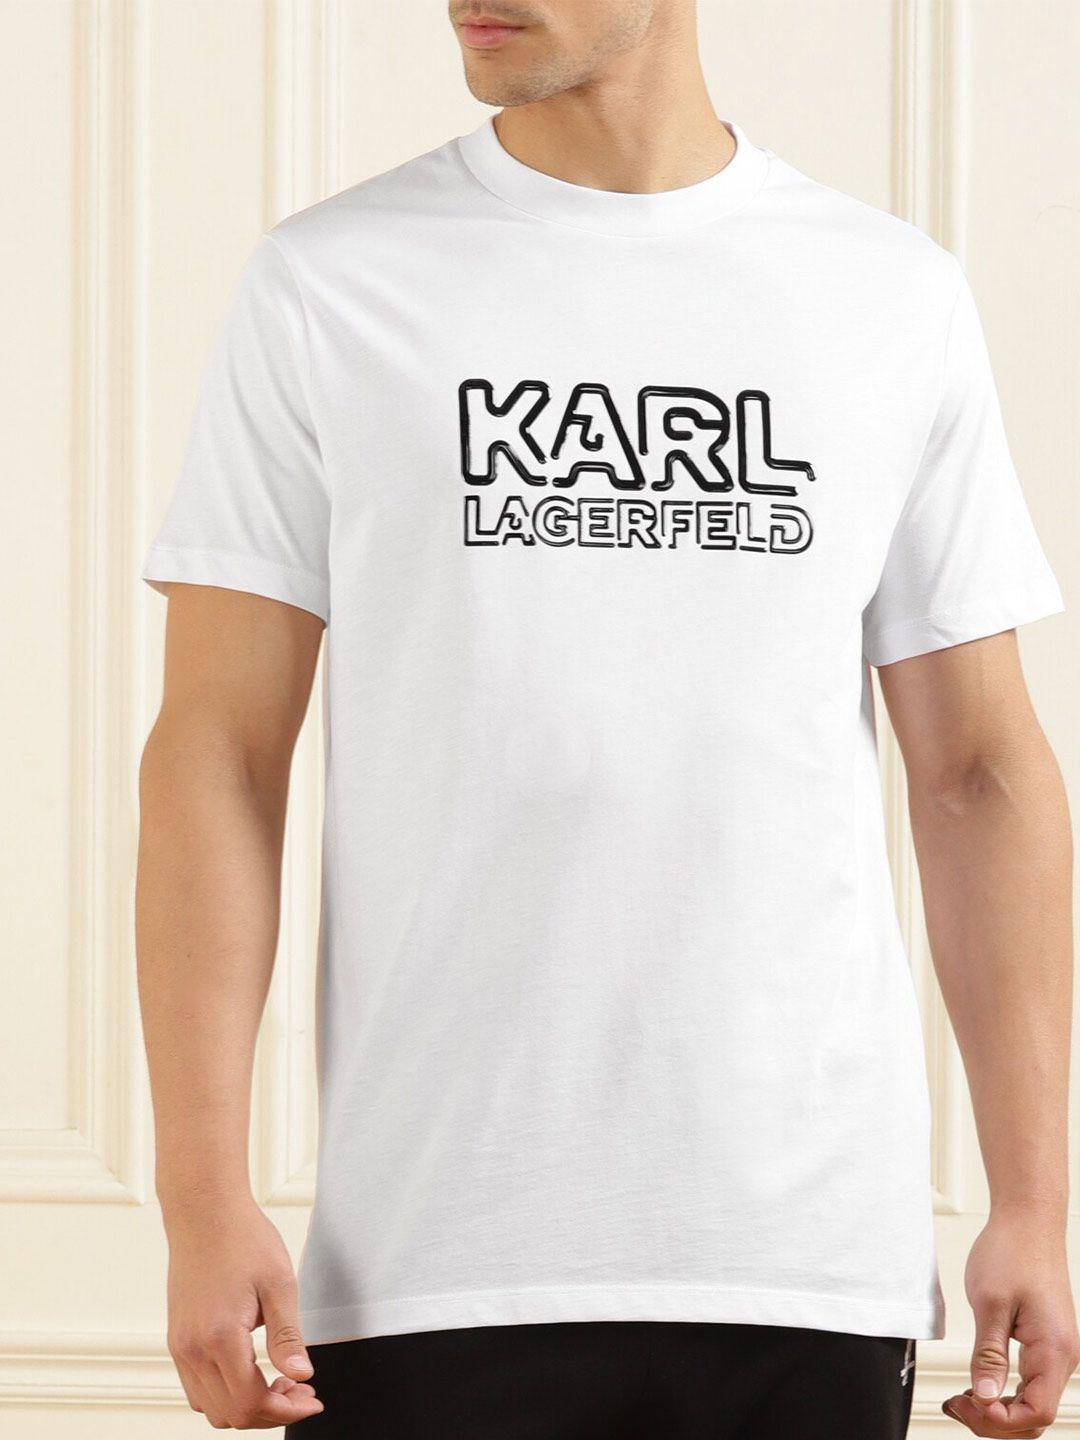 karl lagerfeld typography printed casual cotton t-shirt